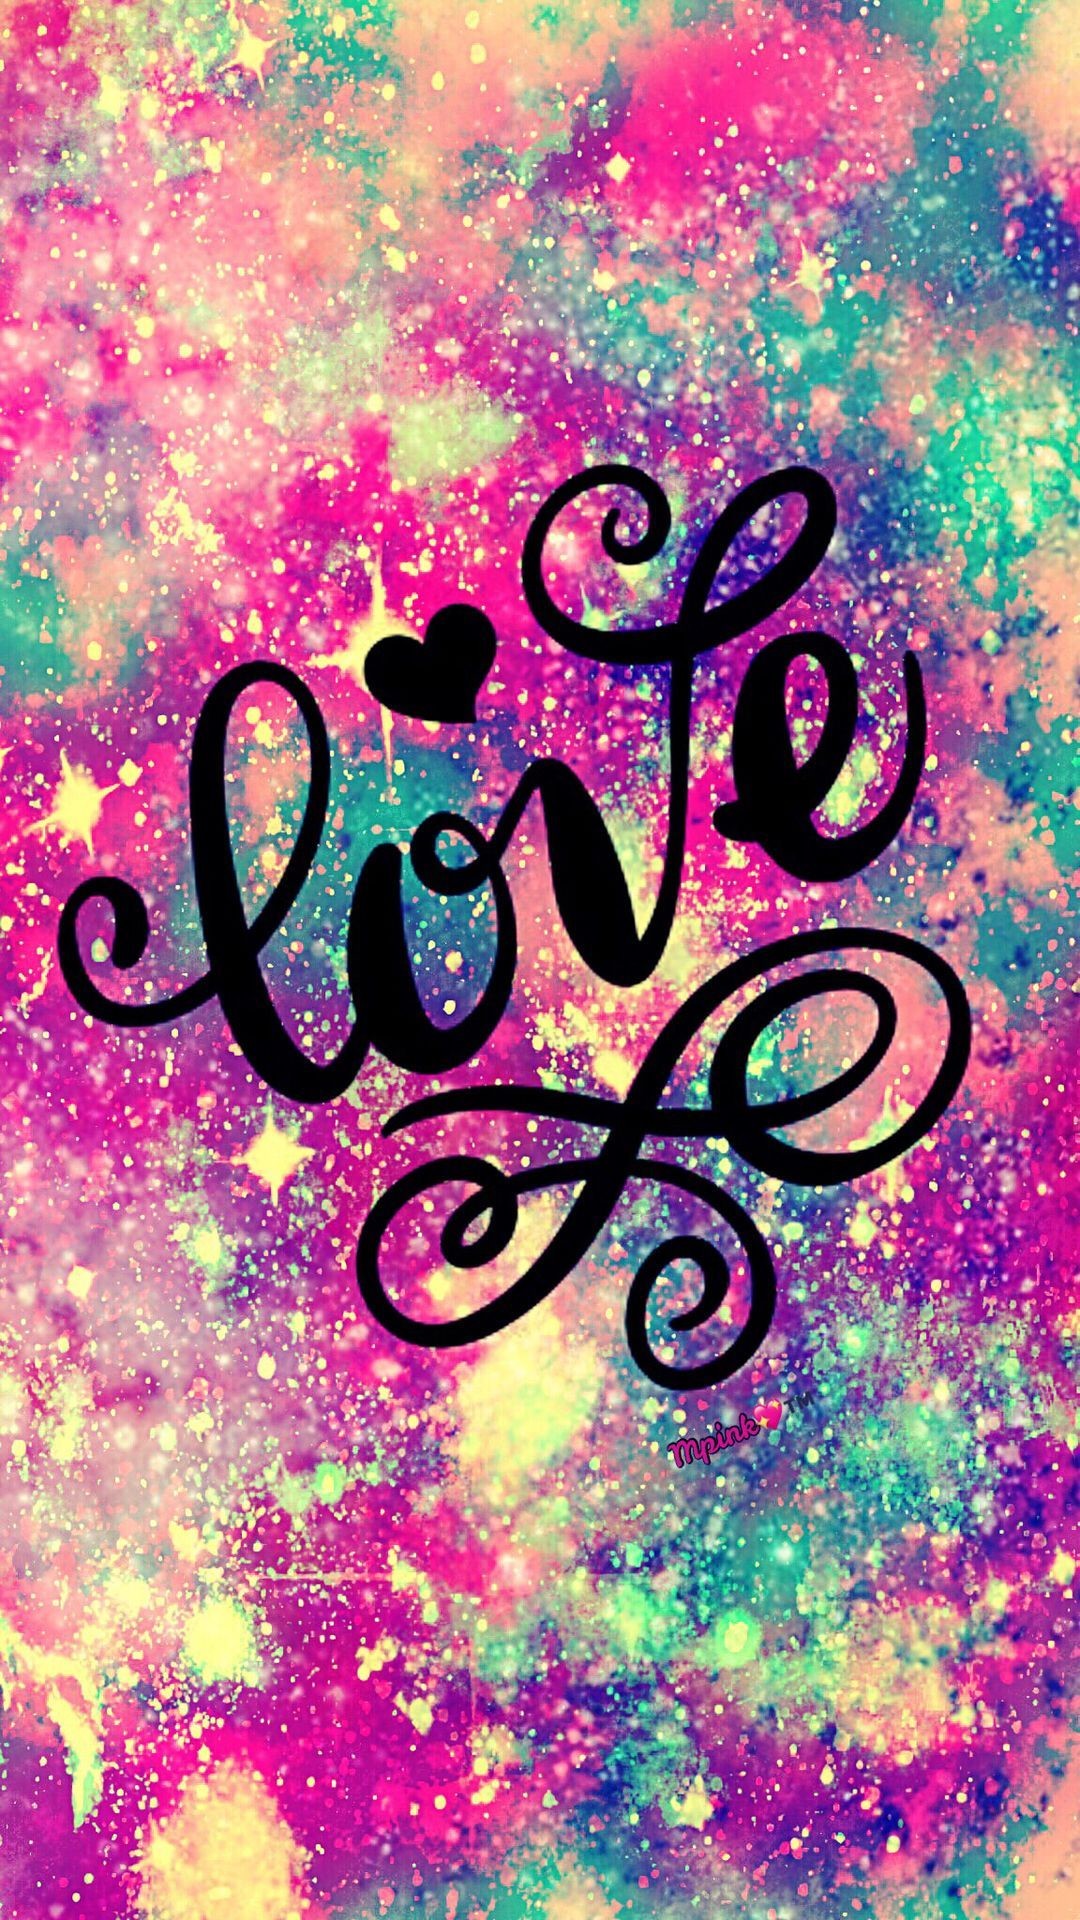 1080x1920 Love Galaxy Wallpaper #androidwallpaper #iphonewallpaper #wallpaper #galaxy  #sparkle #glitter #lockscreen #pretty #pink #cute #inspiration #girly  #words ...